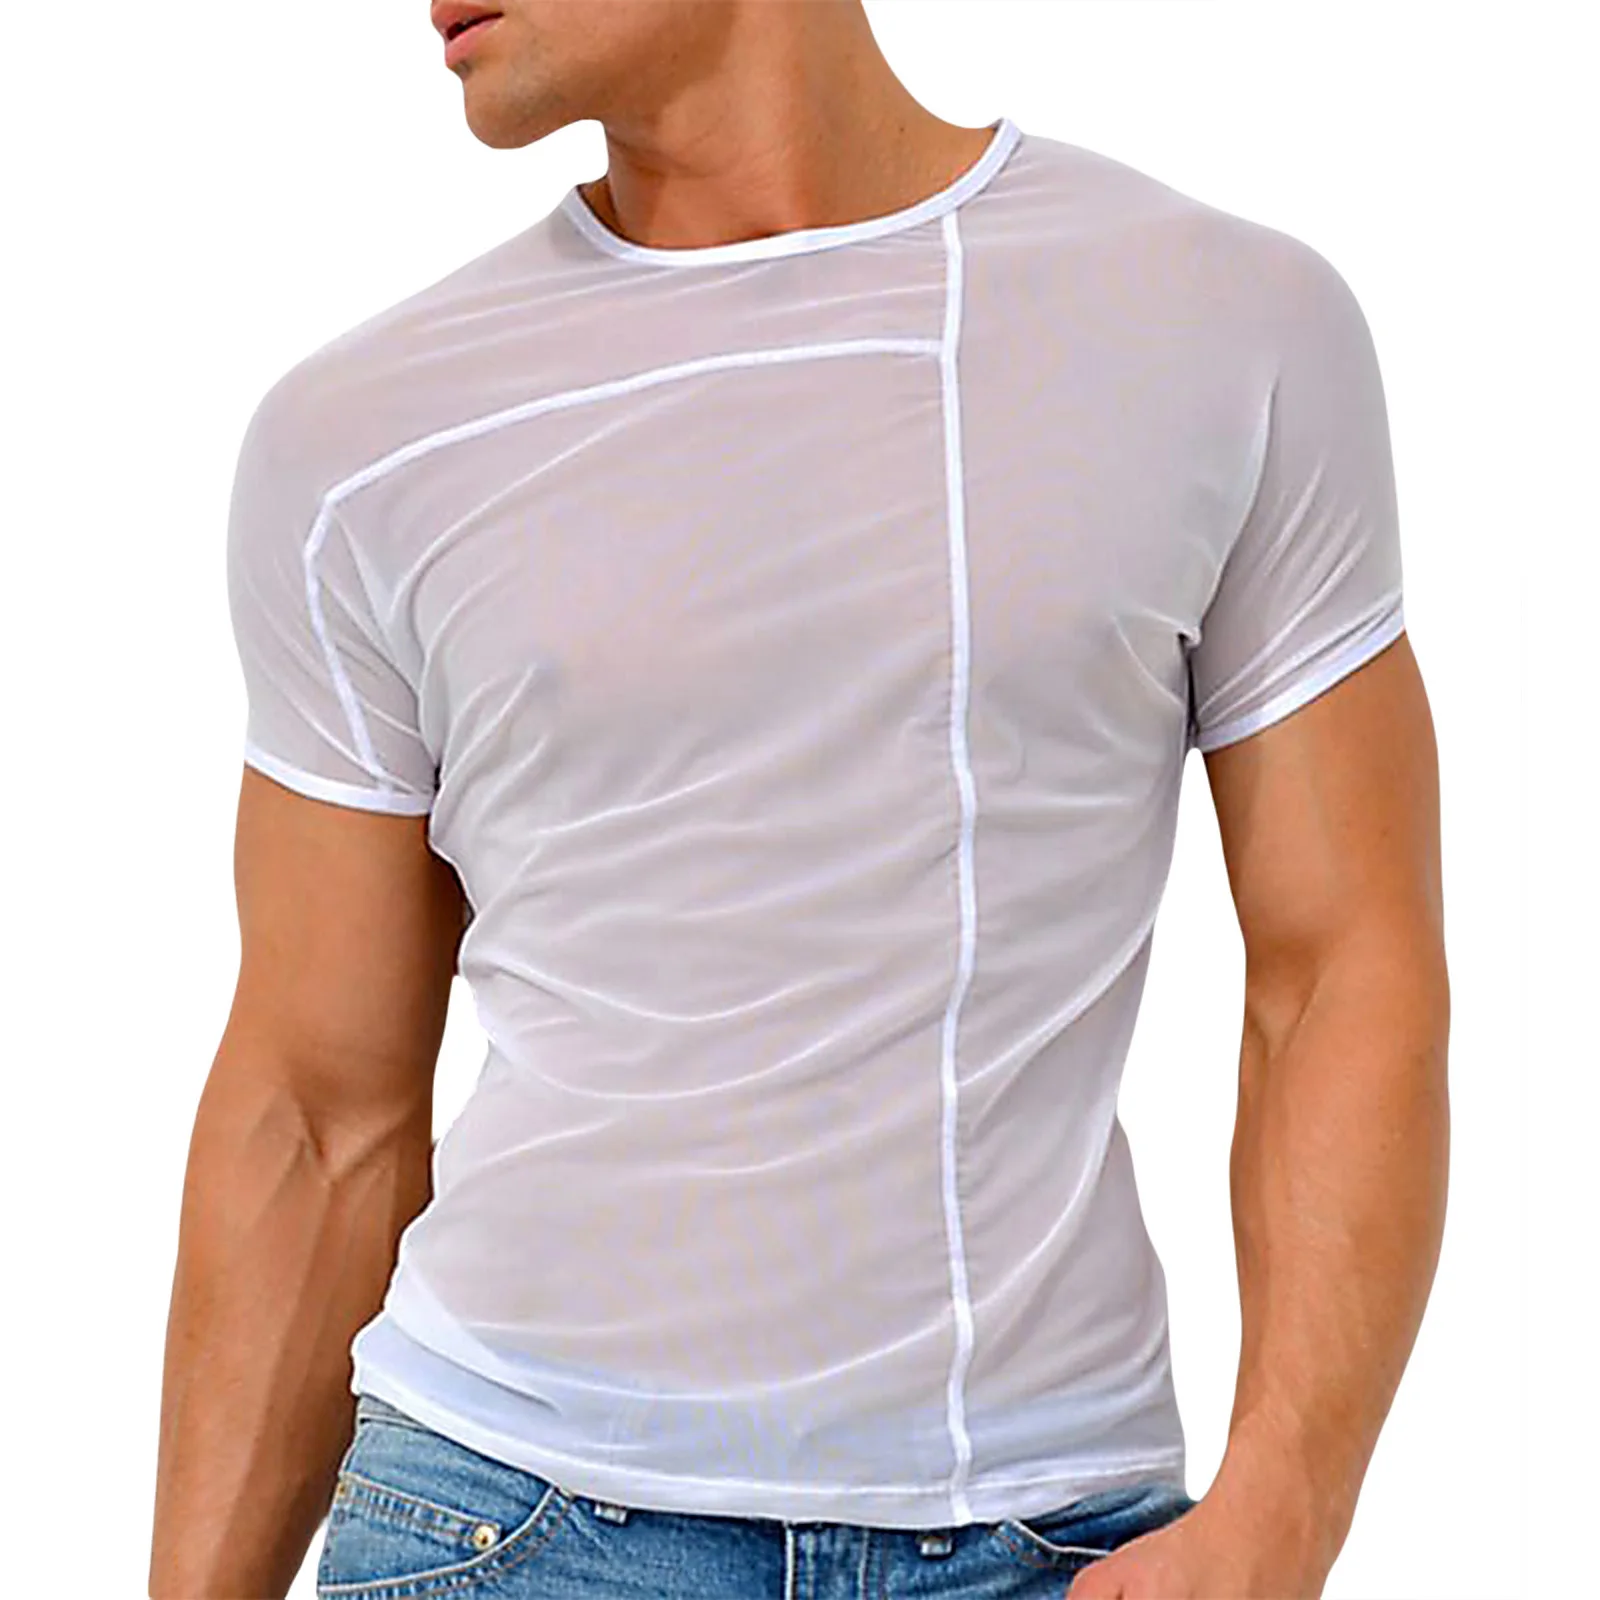 Newest Arrival Men Summer Mesh Tops Cover-Ups Solid Color Round Neck Short Sleeve Pullover See-Through Blouse for Summer white bikini cover up